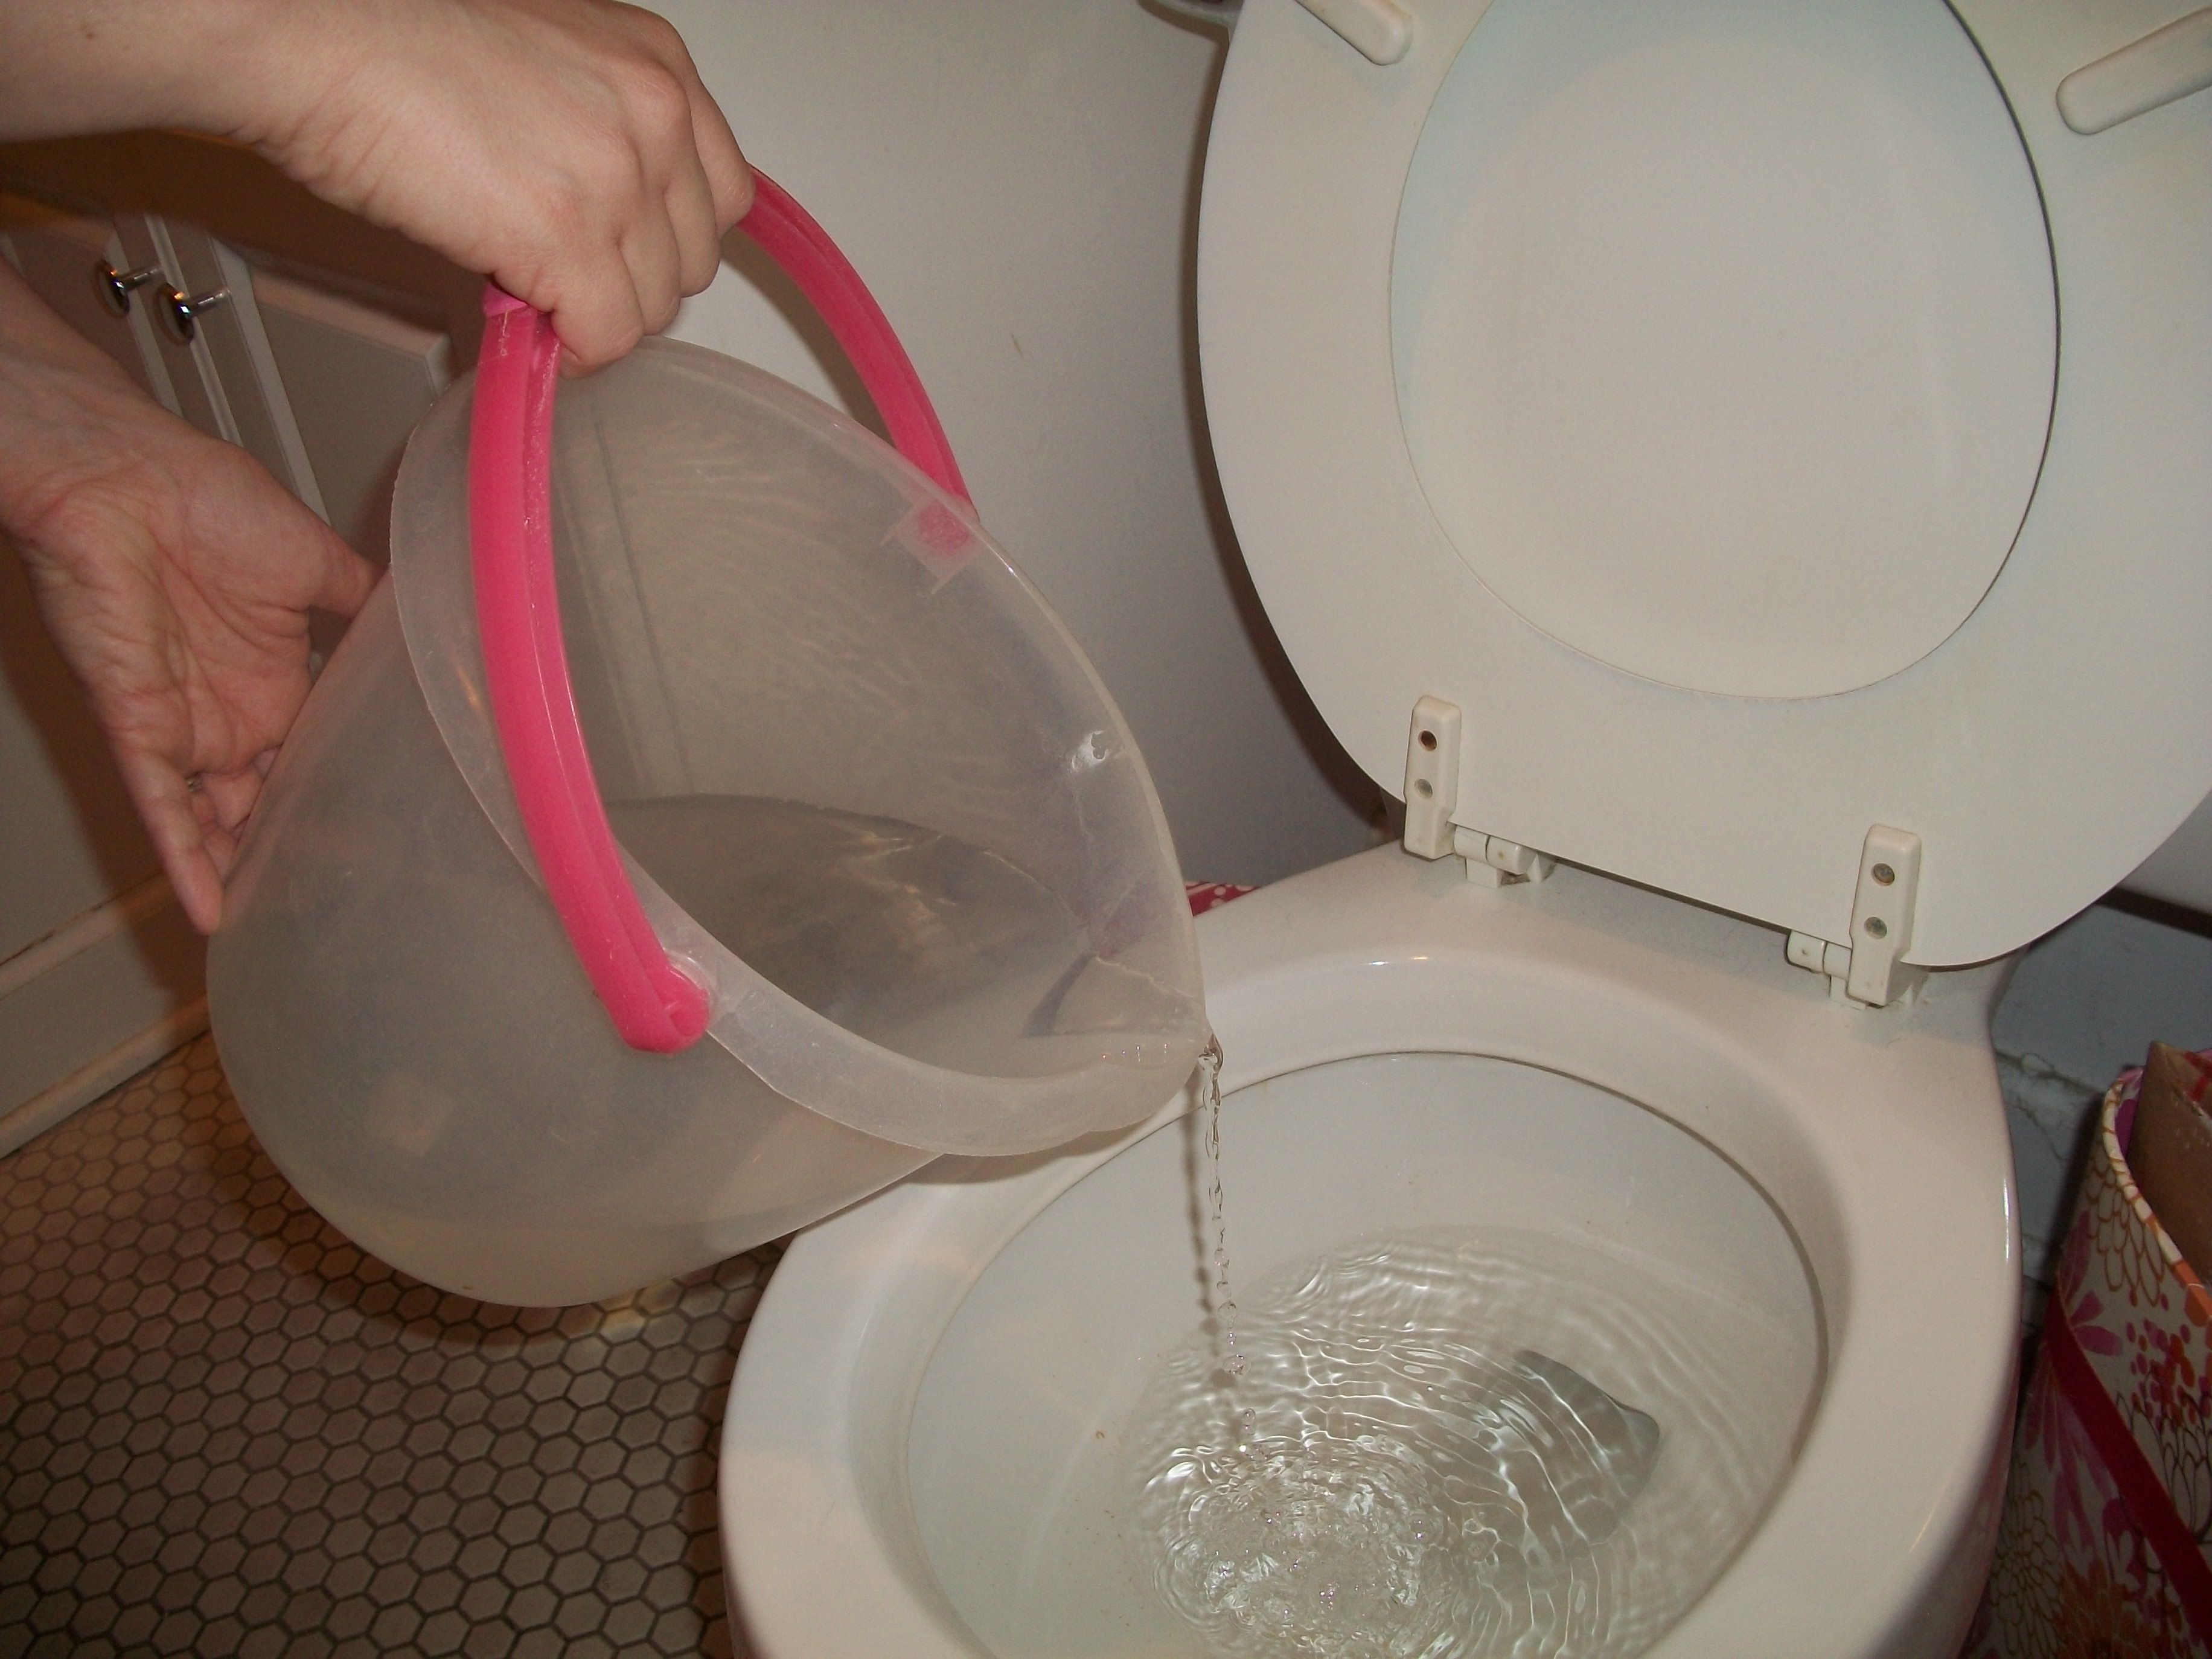 Pouring water into the toilet